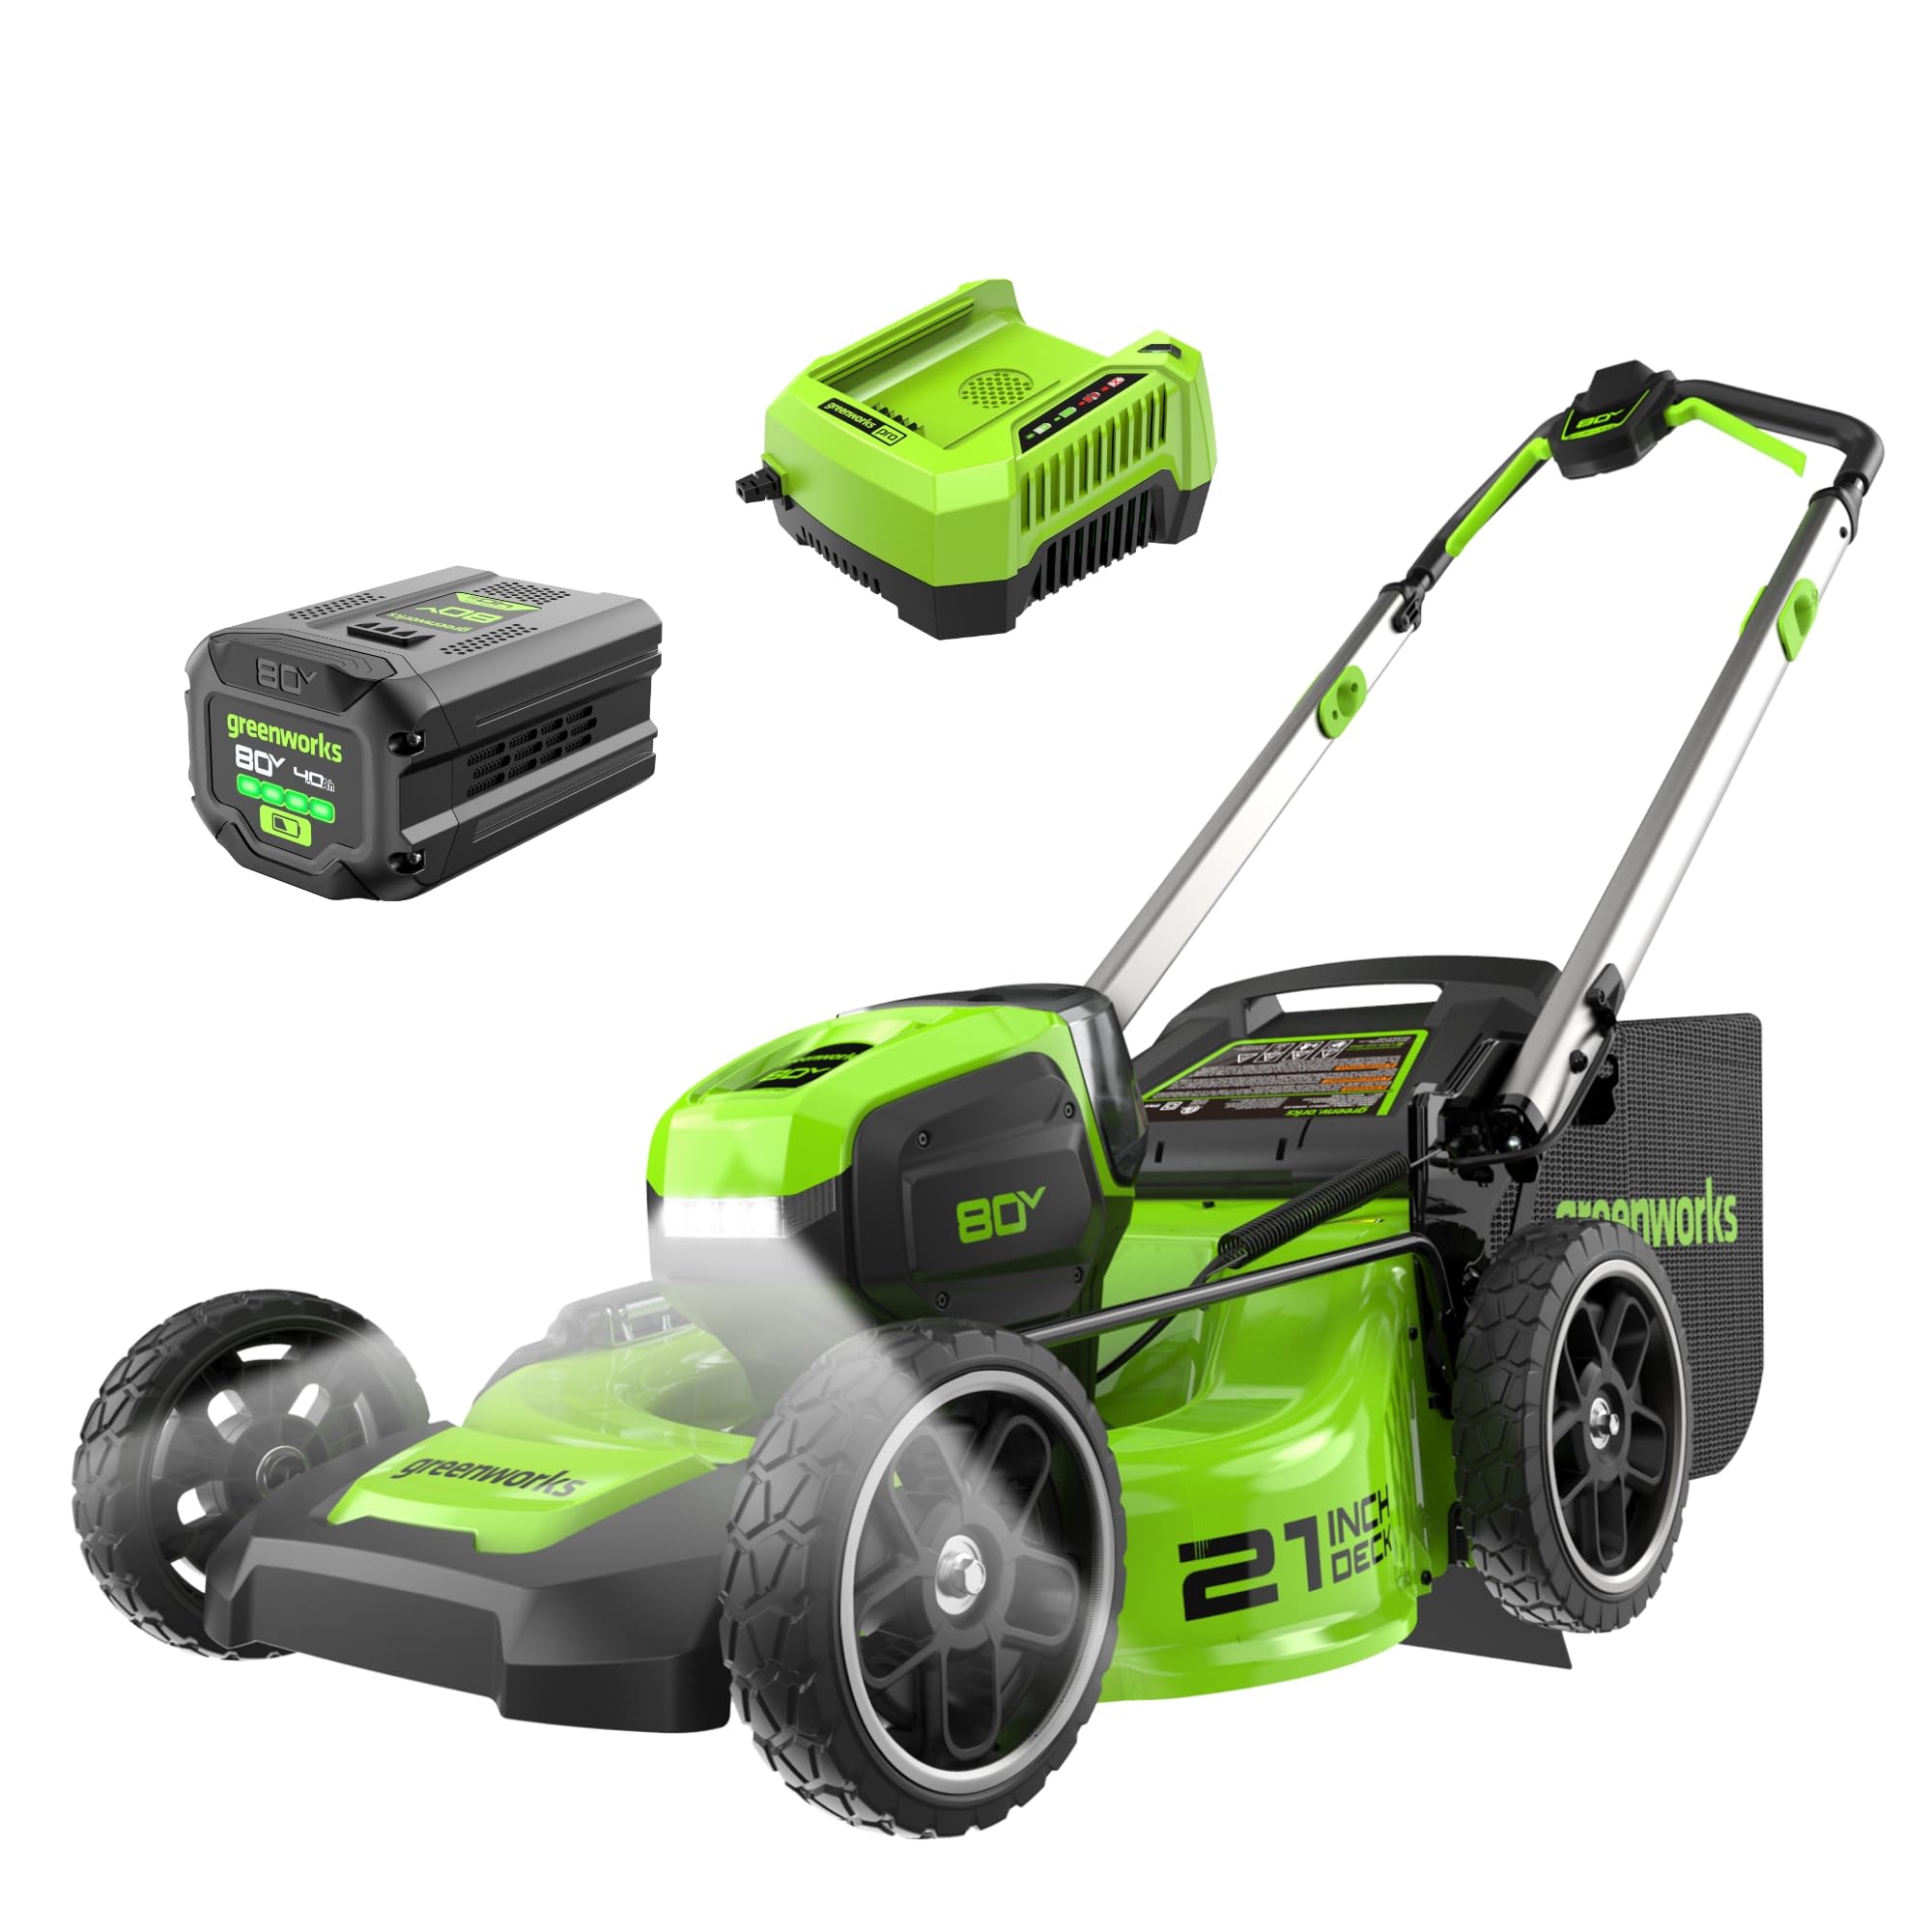 21" Greenworks 80V Brushless Cordless Lawn Mower (LED Headlight + Aluminum Handles) w/ 4.0Ah Battery & Charger $400 + Free Shipping